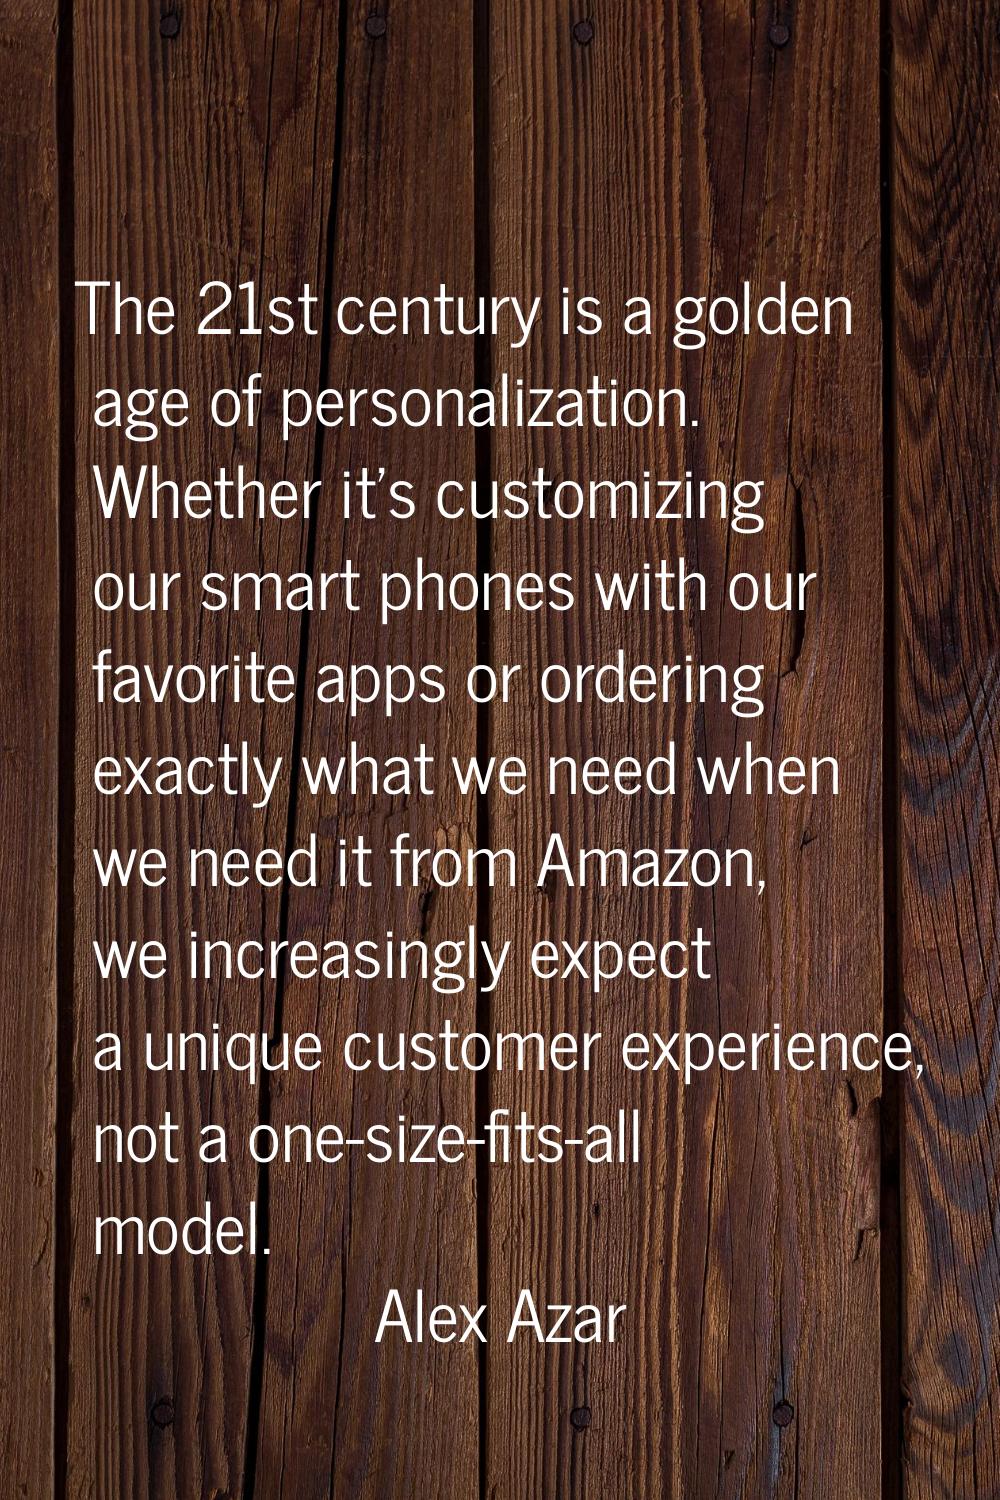 The 21st century is a golden age of personalization. Whether it's customizing our smart phones with